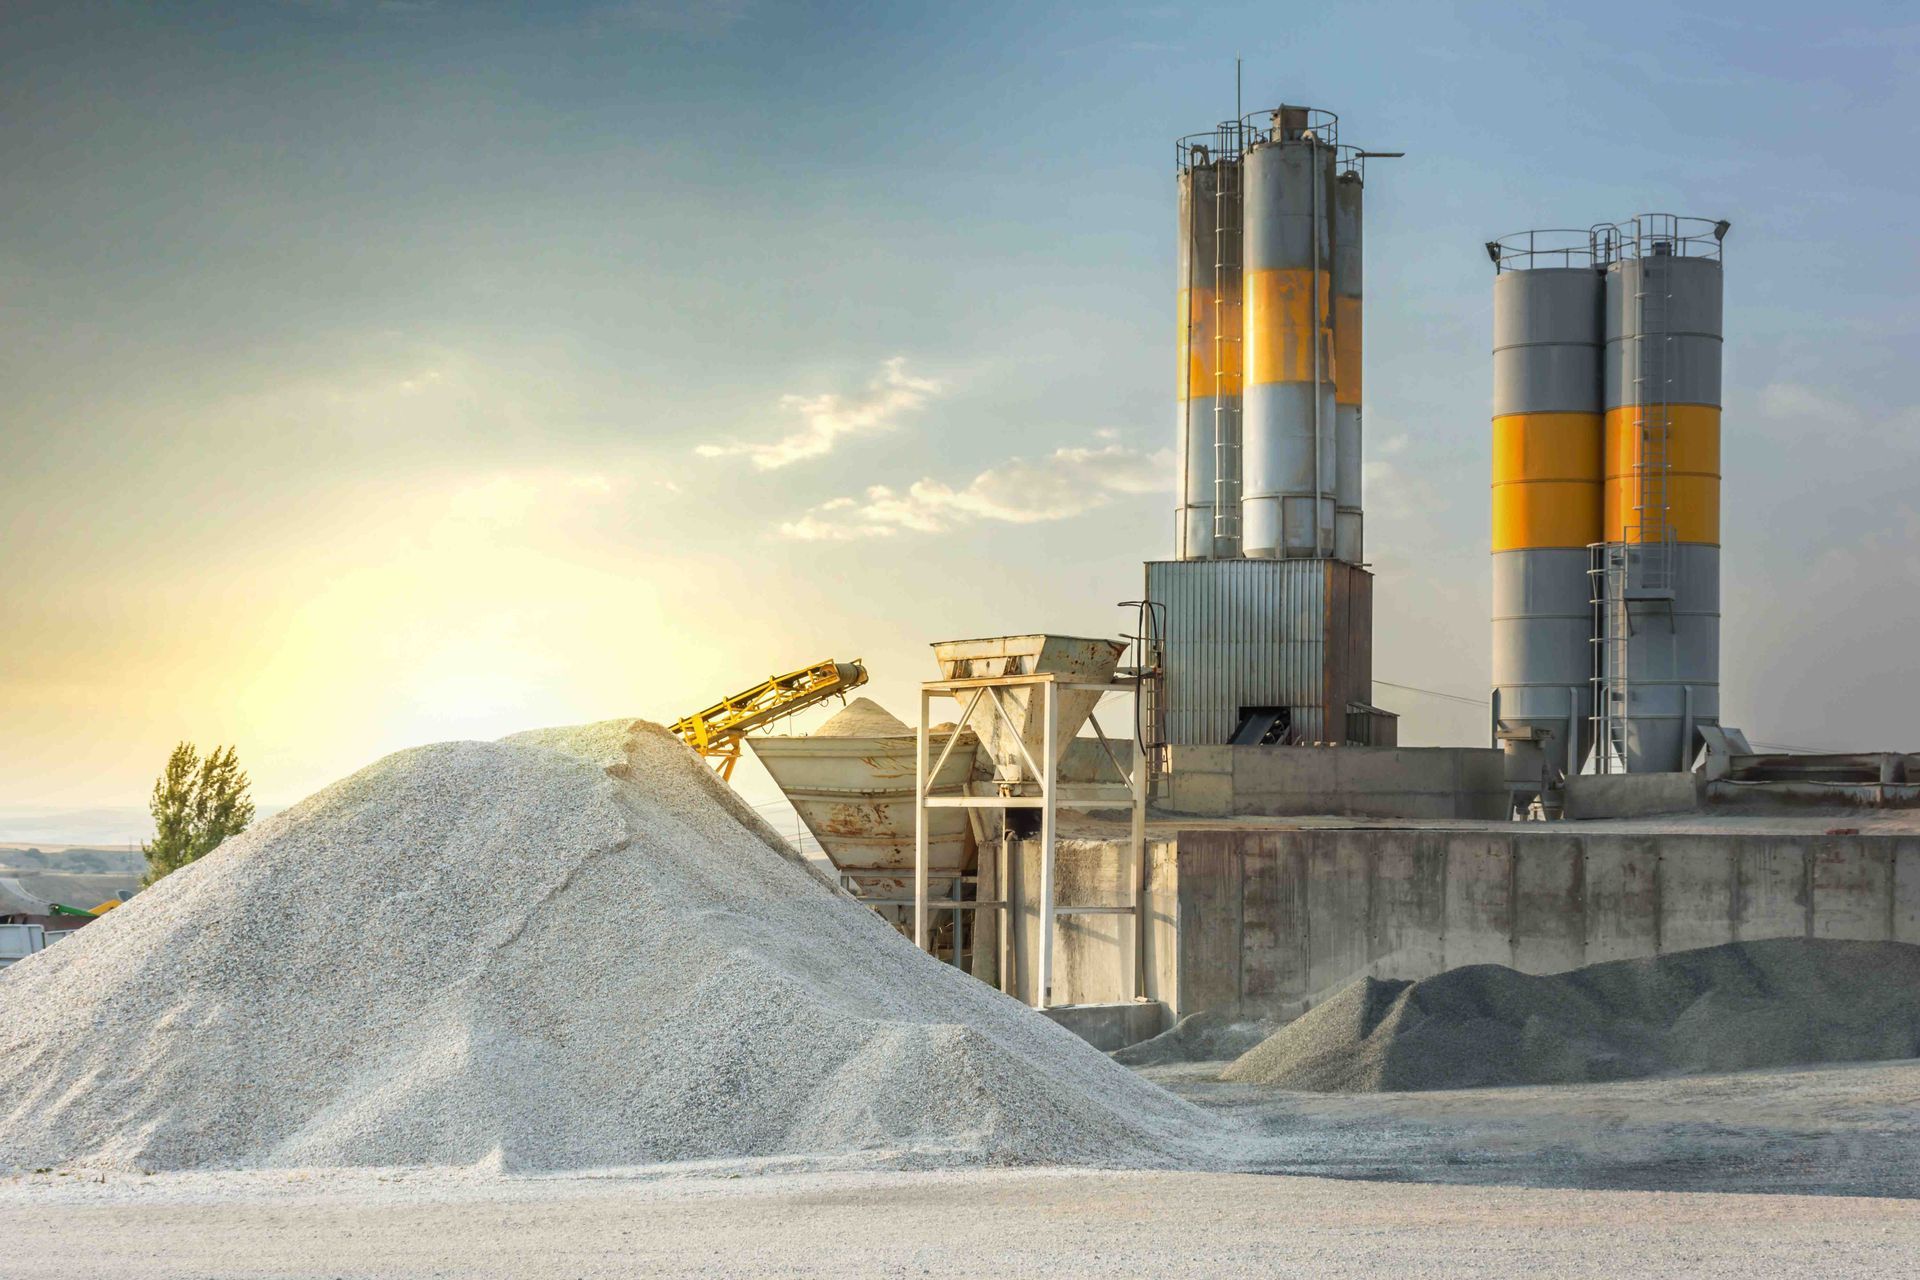  step-by-step process of cement production